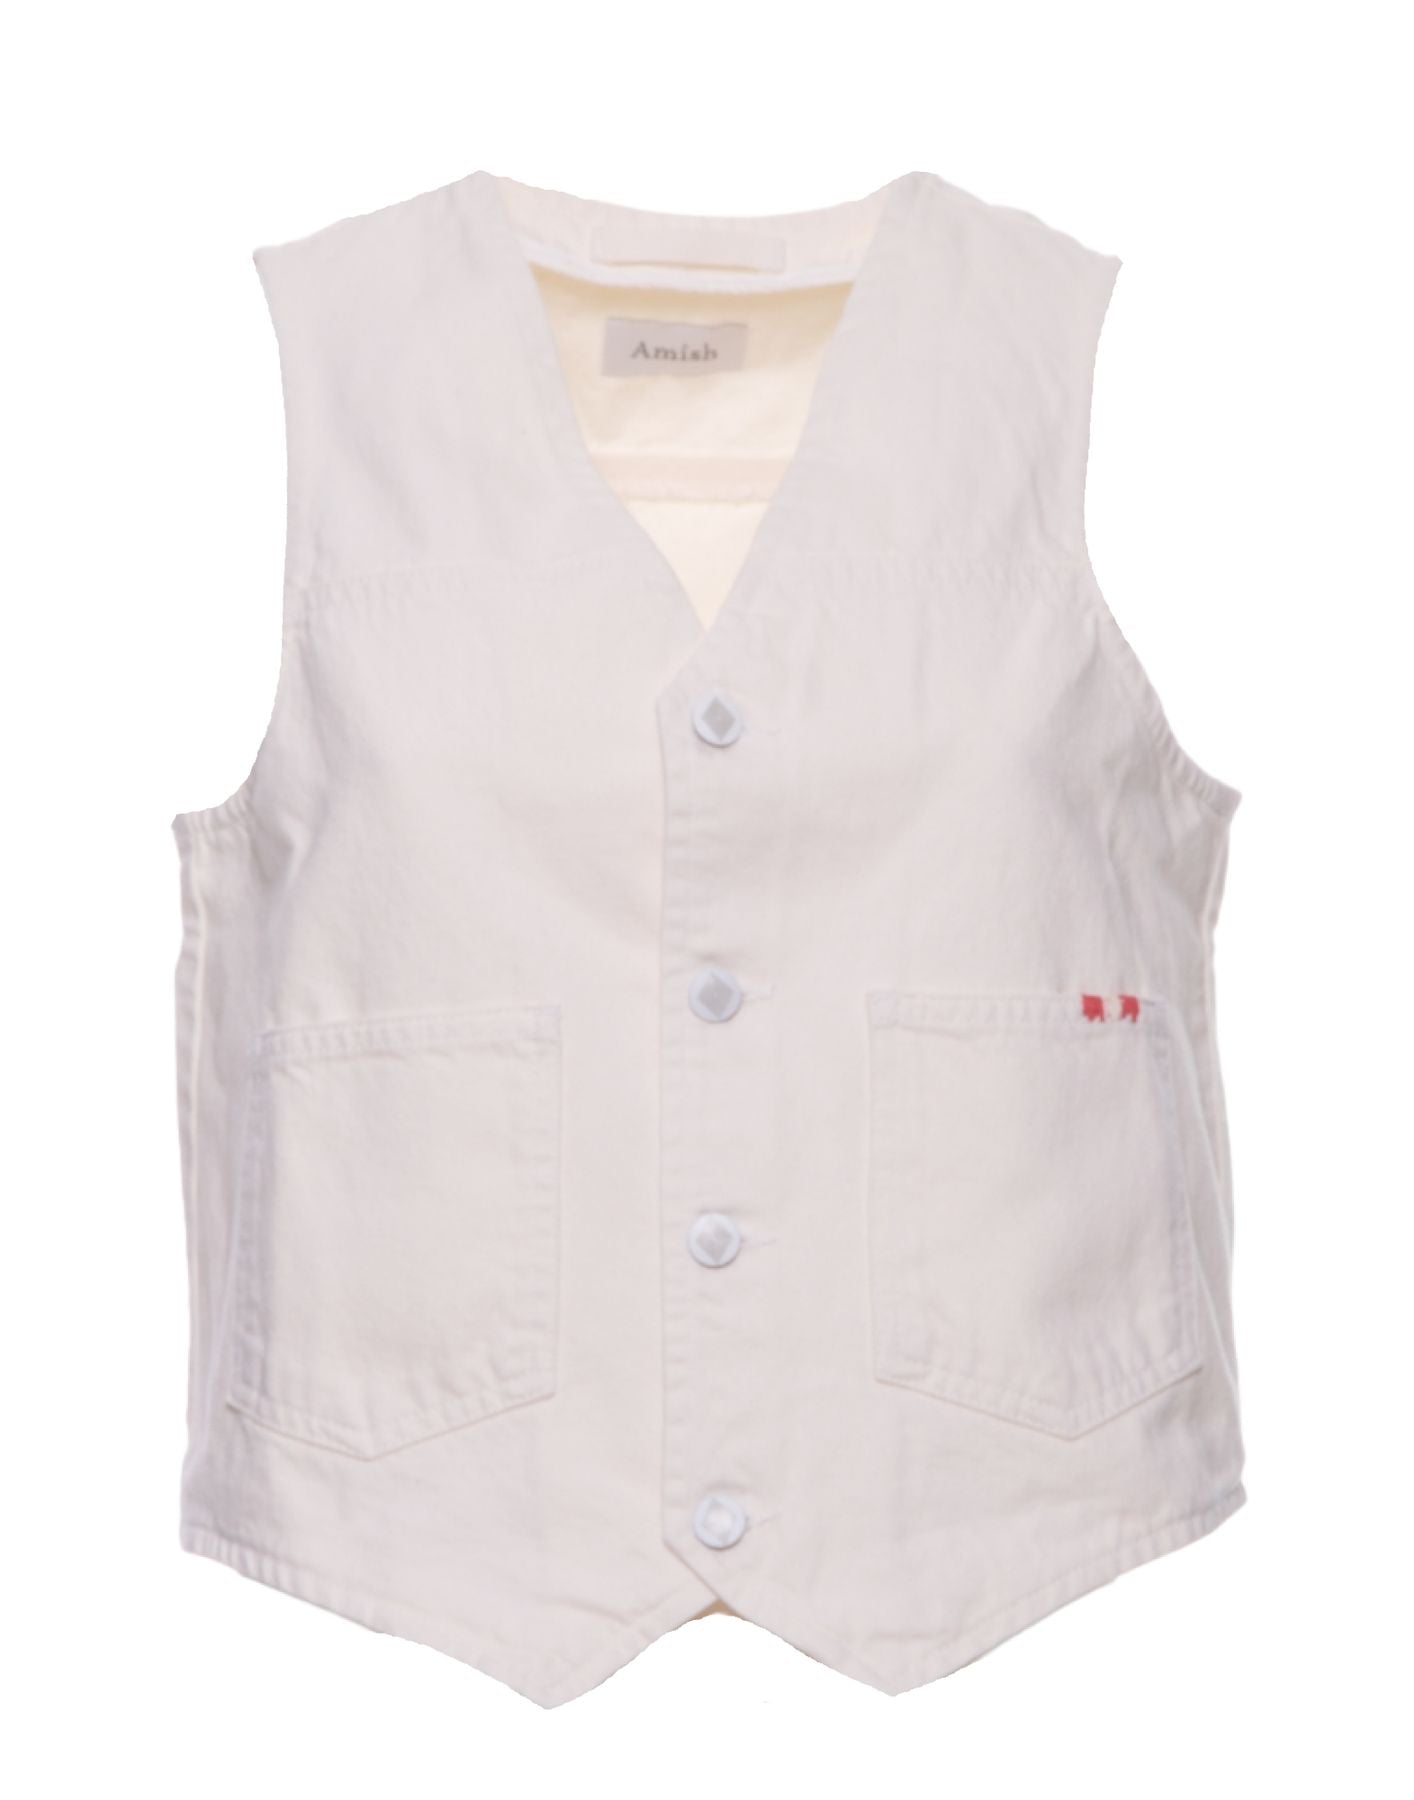 Vest for woman AMD078P3200111 OFF WHITE Amish